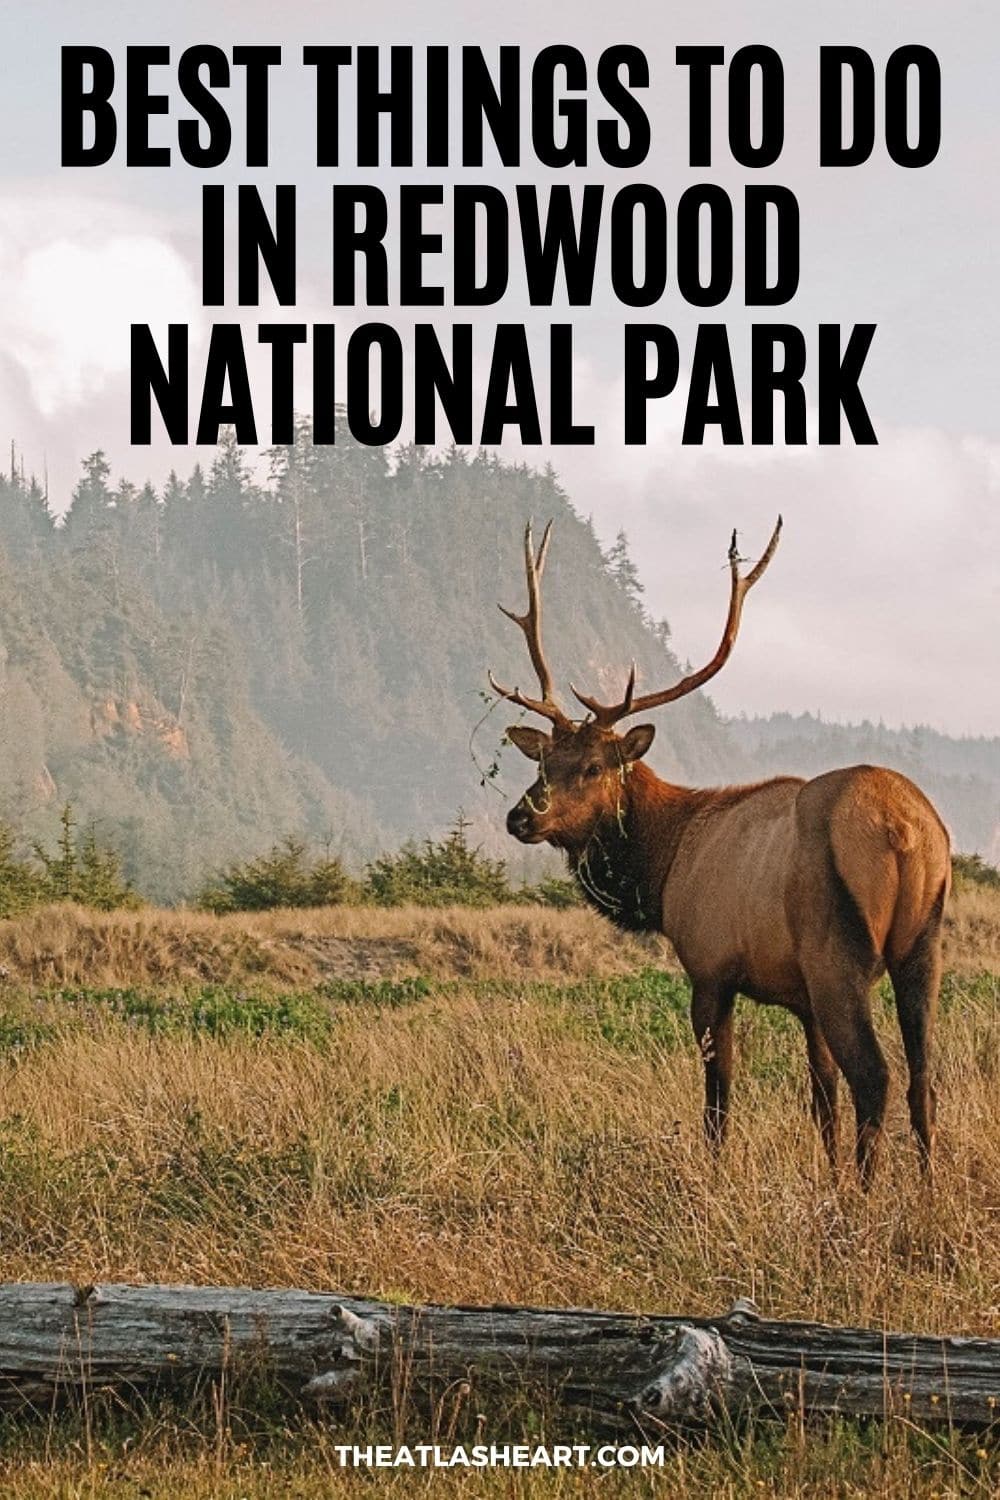 35 Top & Best Things to do in Redwood National Park, California [Ultimate Redwood Bucket List]